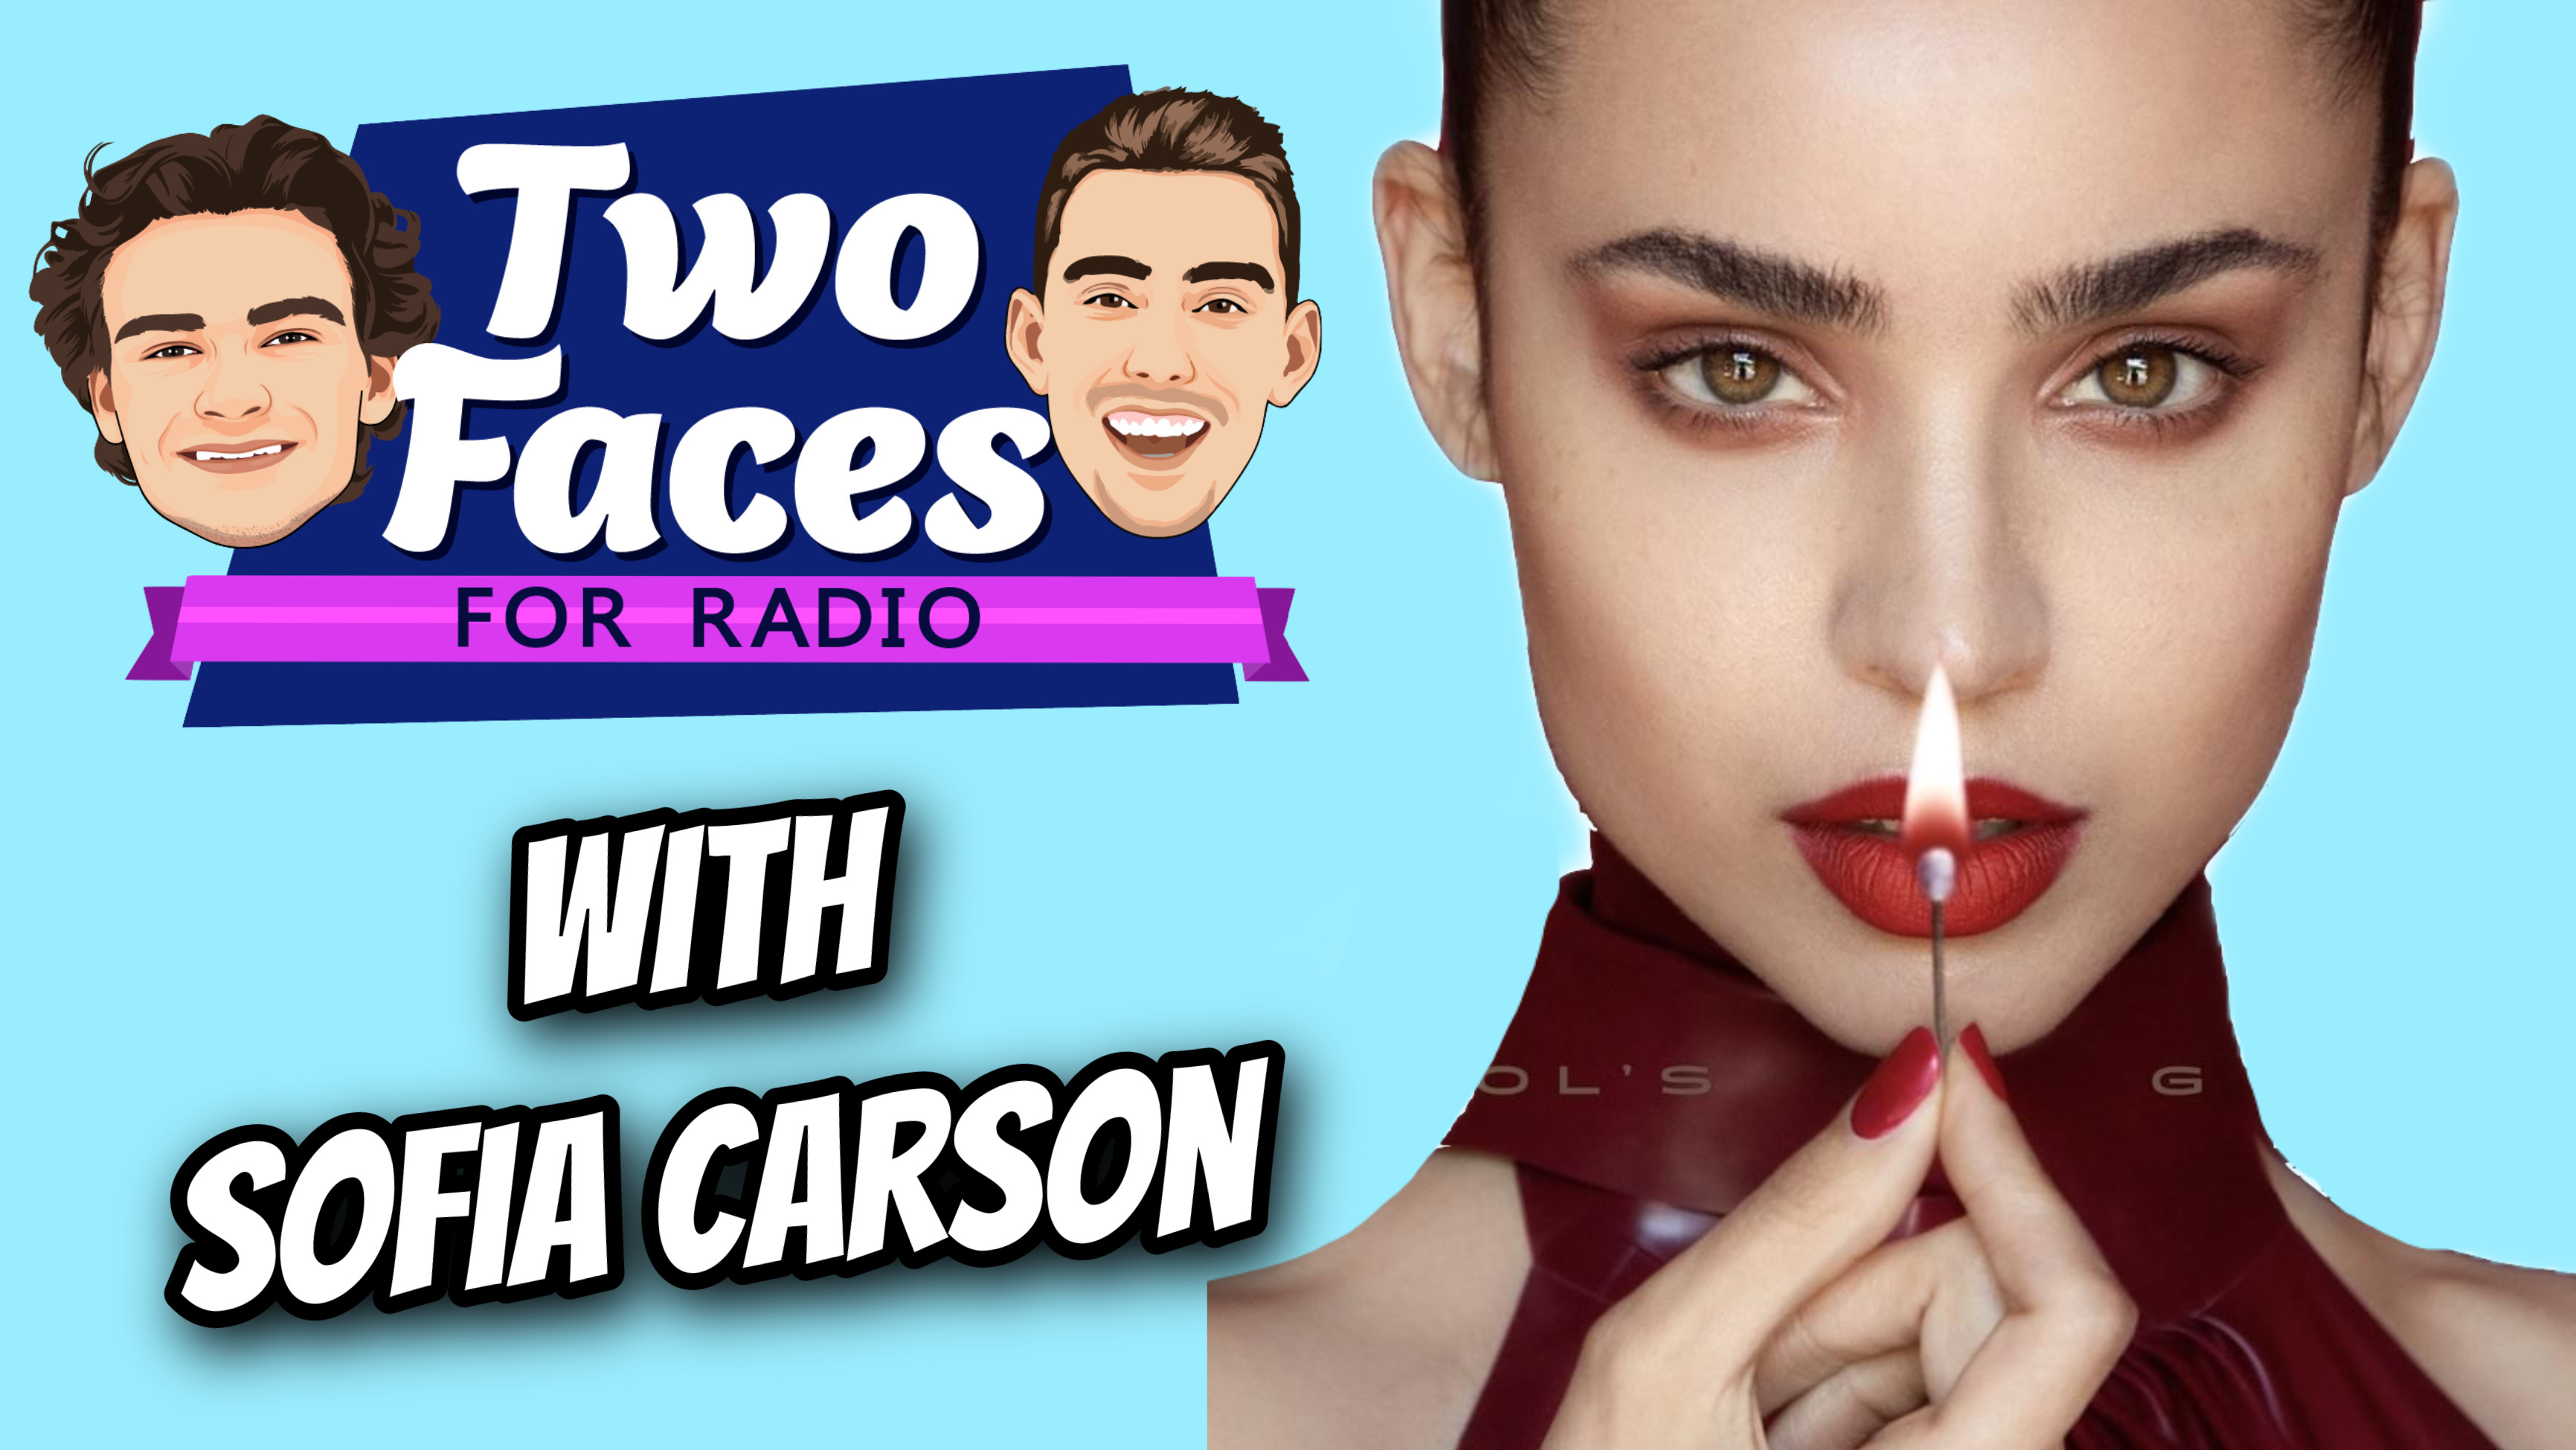 Sofia Carson Joins Two Faces For Radio [WATCH]